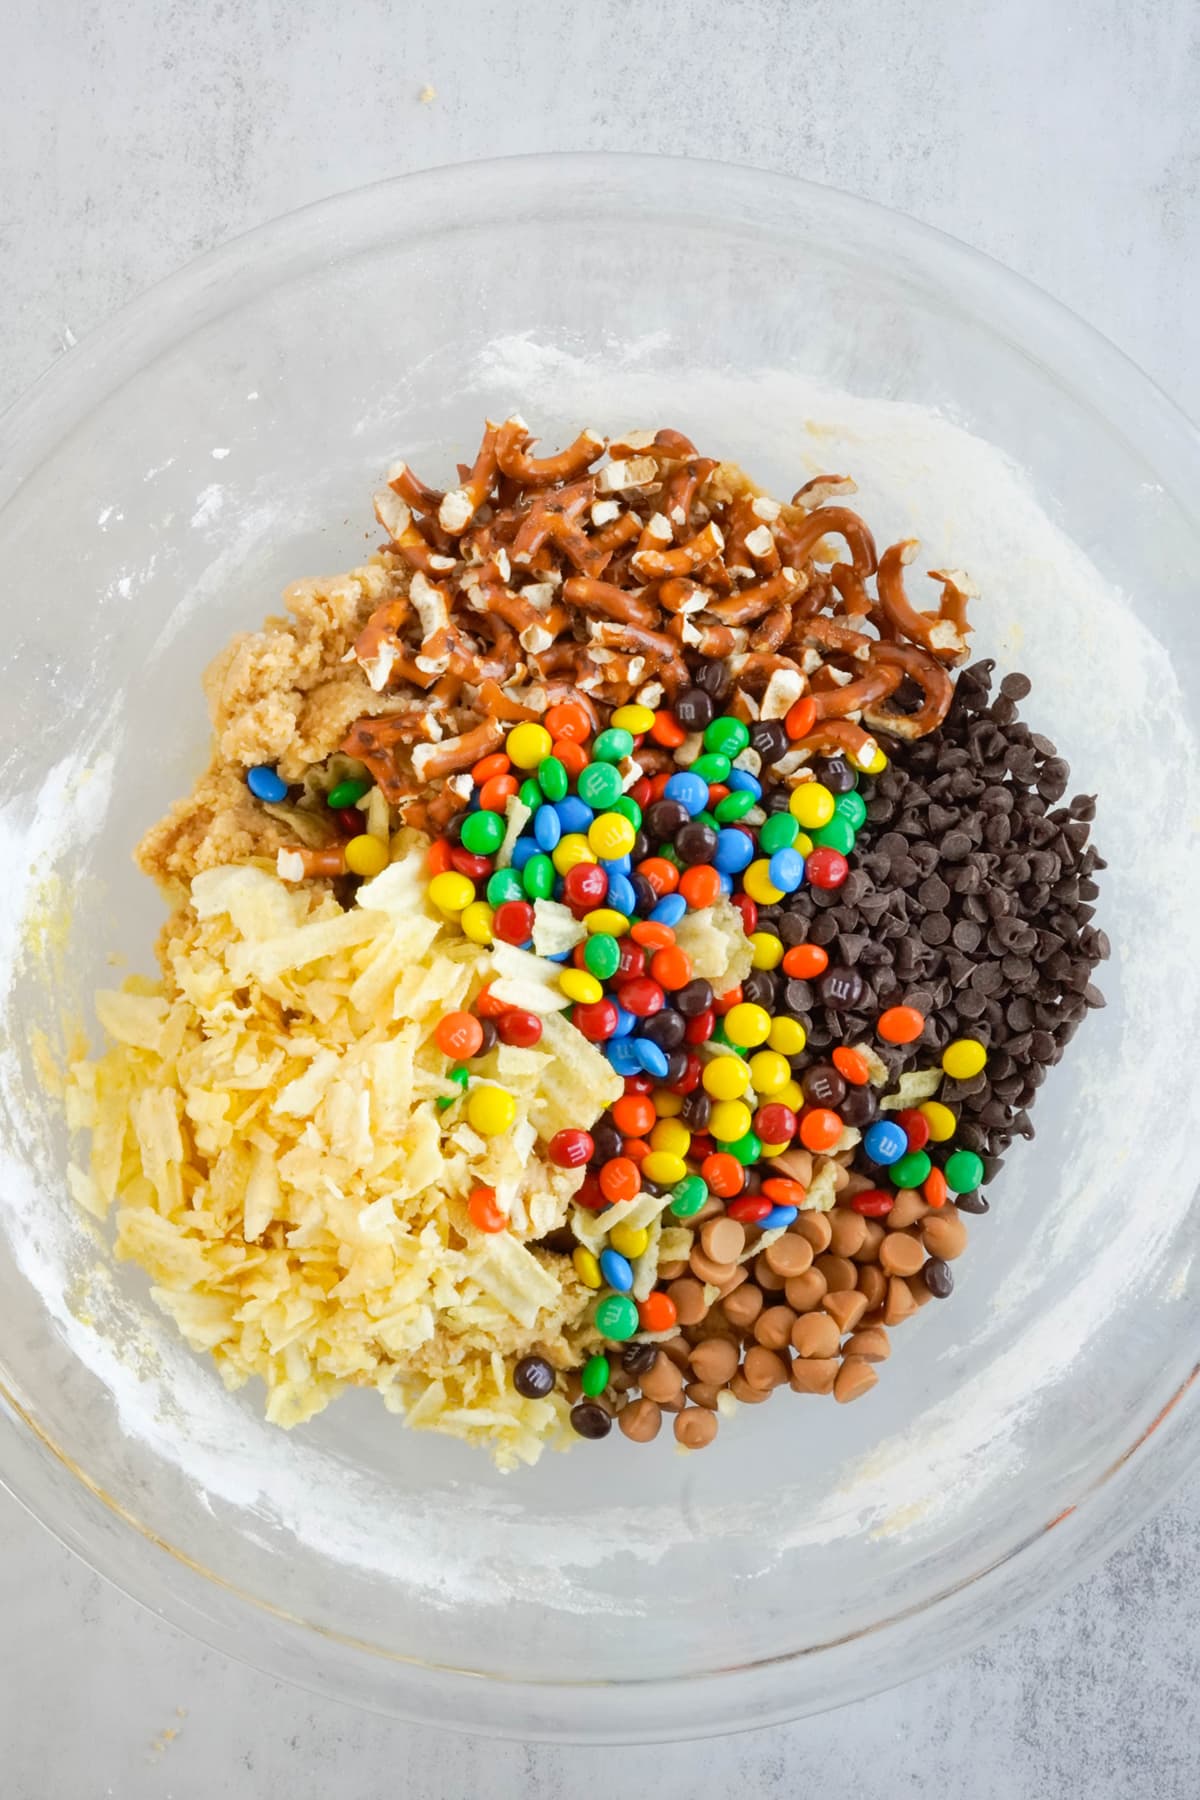 Chips and candies on top of the cookie dough